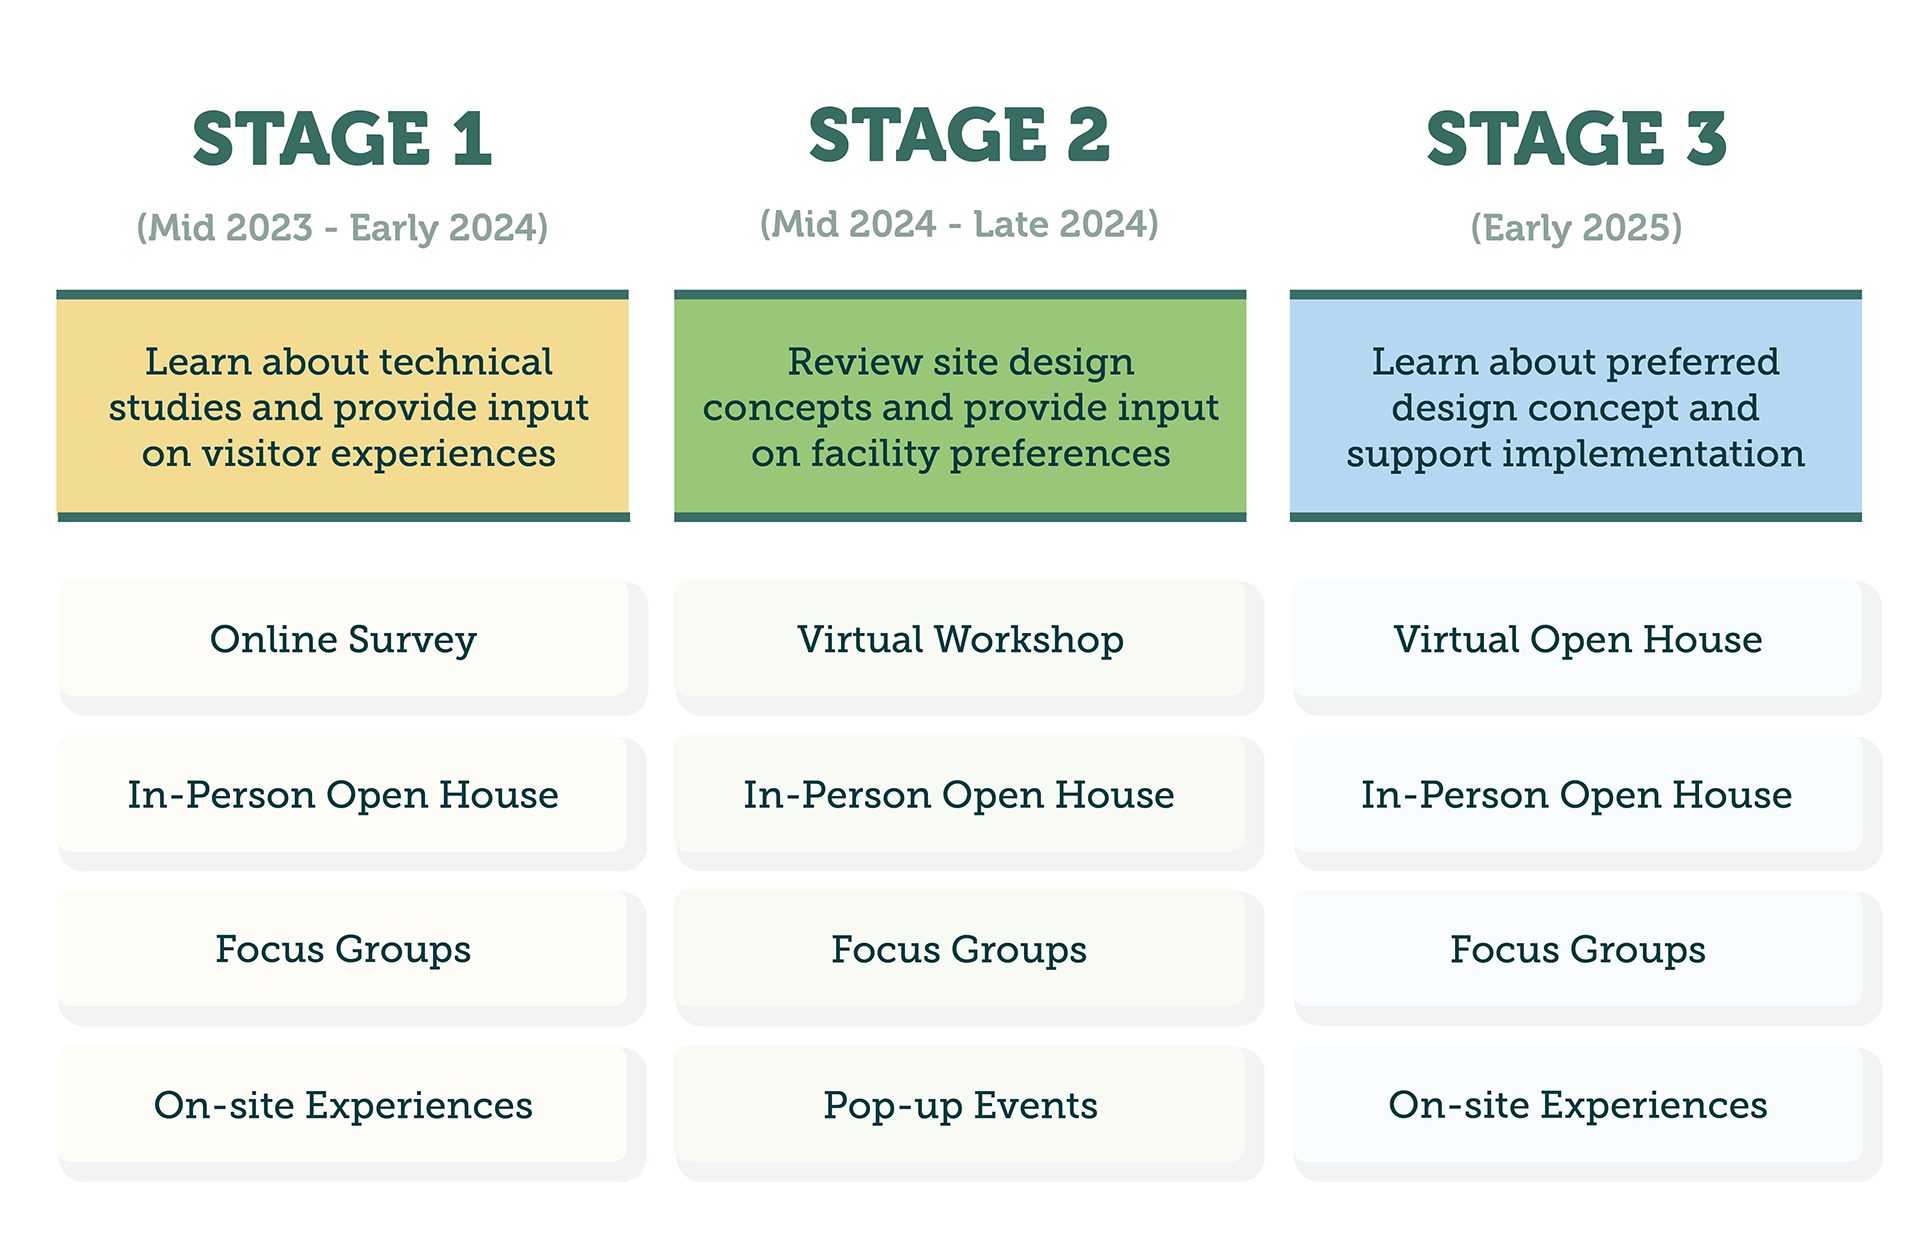 A matrix diagram with three columns indicating three planning phases and associated engagement activities. In Stage 1, beginning in mid-2023 and ending in early 2024, there will be engagement activities to learn about technical studies and provide input on visitor experiences. Activities include an online survey, in-person open house, focus groups, and on-site experiences. In Stage 2, beginning in mid-2024 and ending in late 2024, there will be engagement activities to review site design concepts and provide input on facility preferences. Activities include a virtual workshop, in-person open house, focus groups, and pop-up events. State 3 will take place in early 2025 and will include engagement opportunities to learn about the preferred design concept and support implementation. Activities include a virtual open house, in-person open house, focus groups, and on-site experiences.